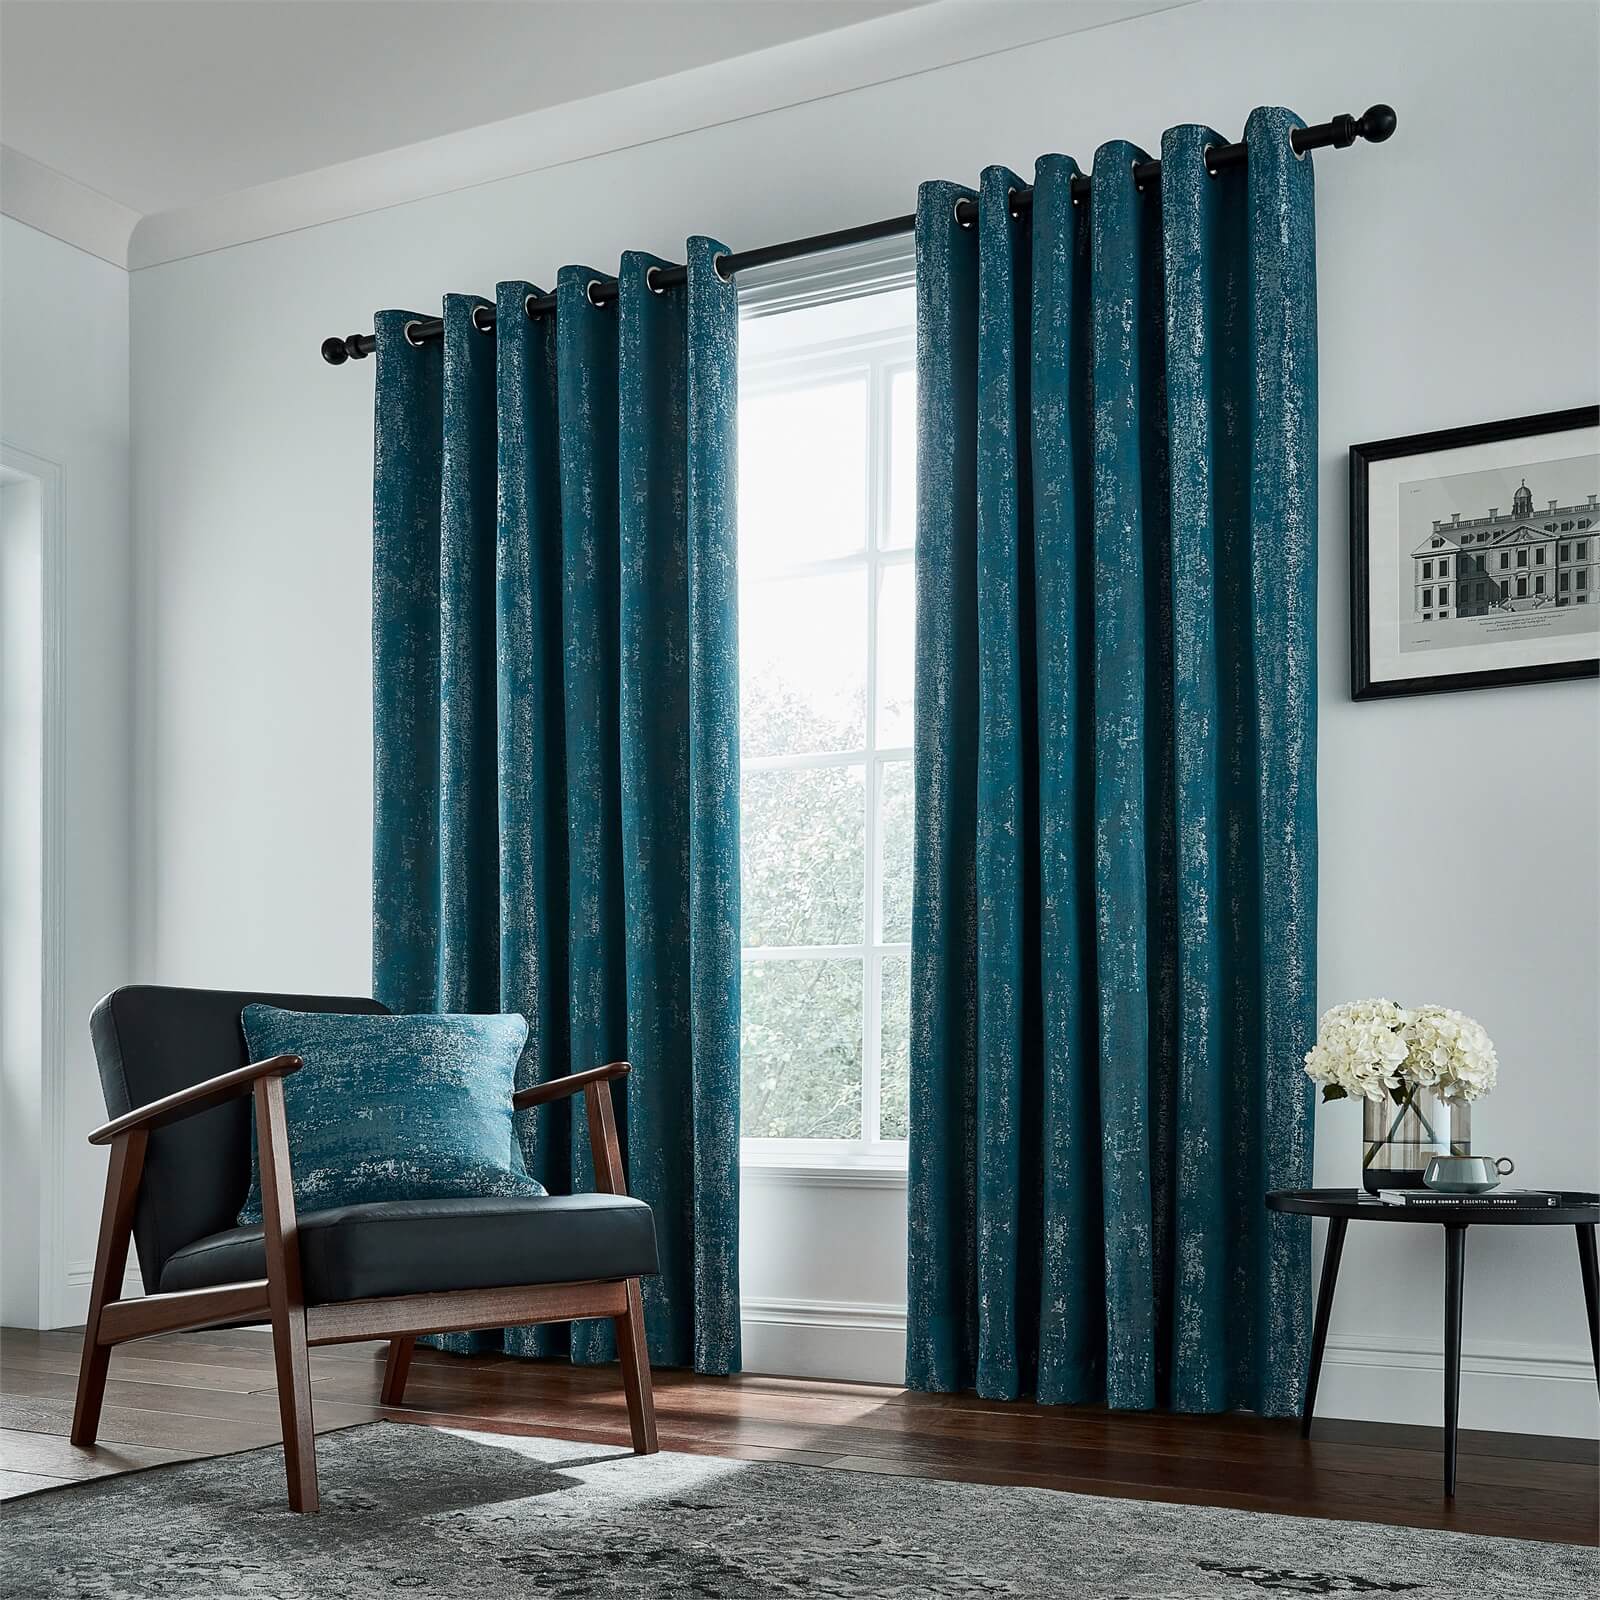 Peacock Blue Hotel Collection Roma Lined Curtains 66 x 72 - Emerald